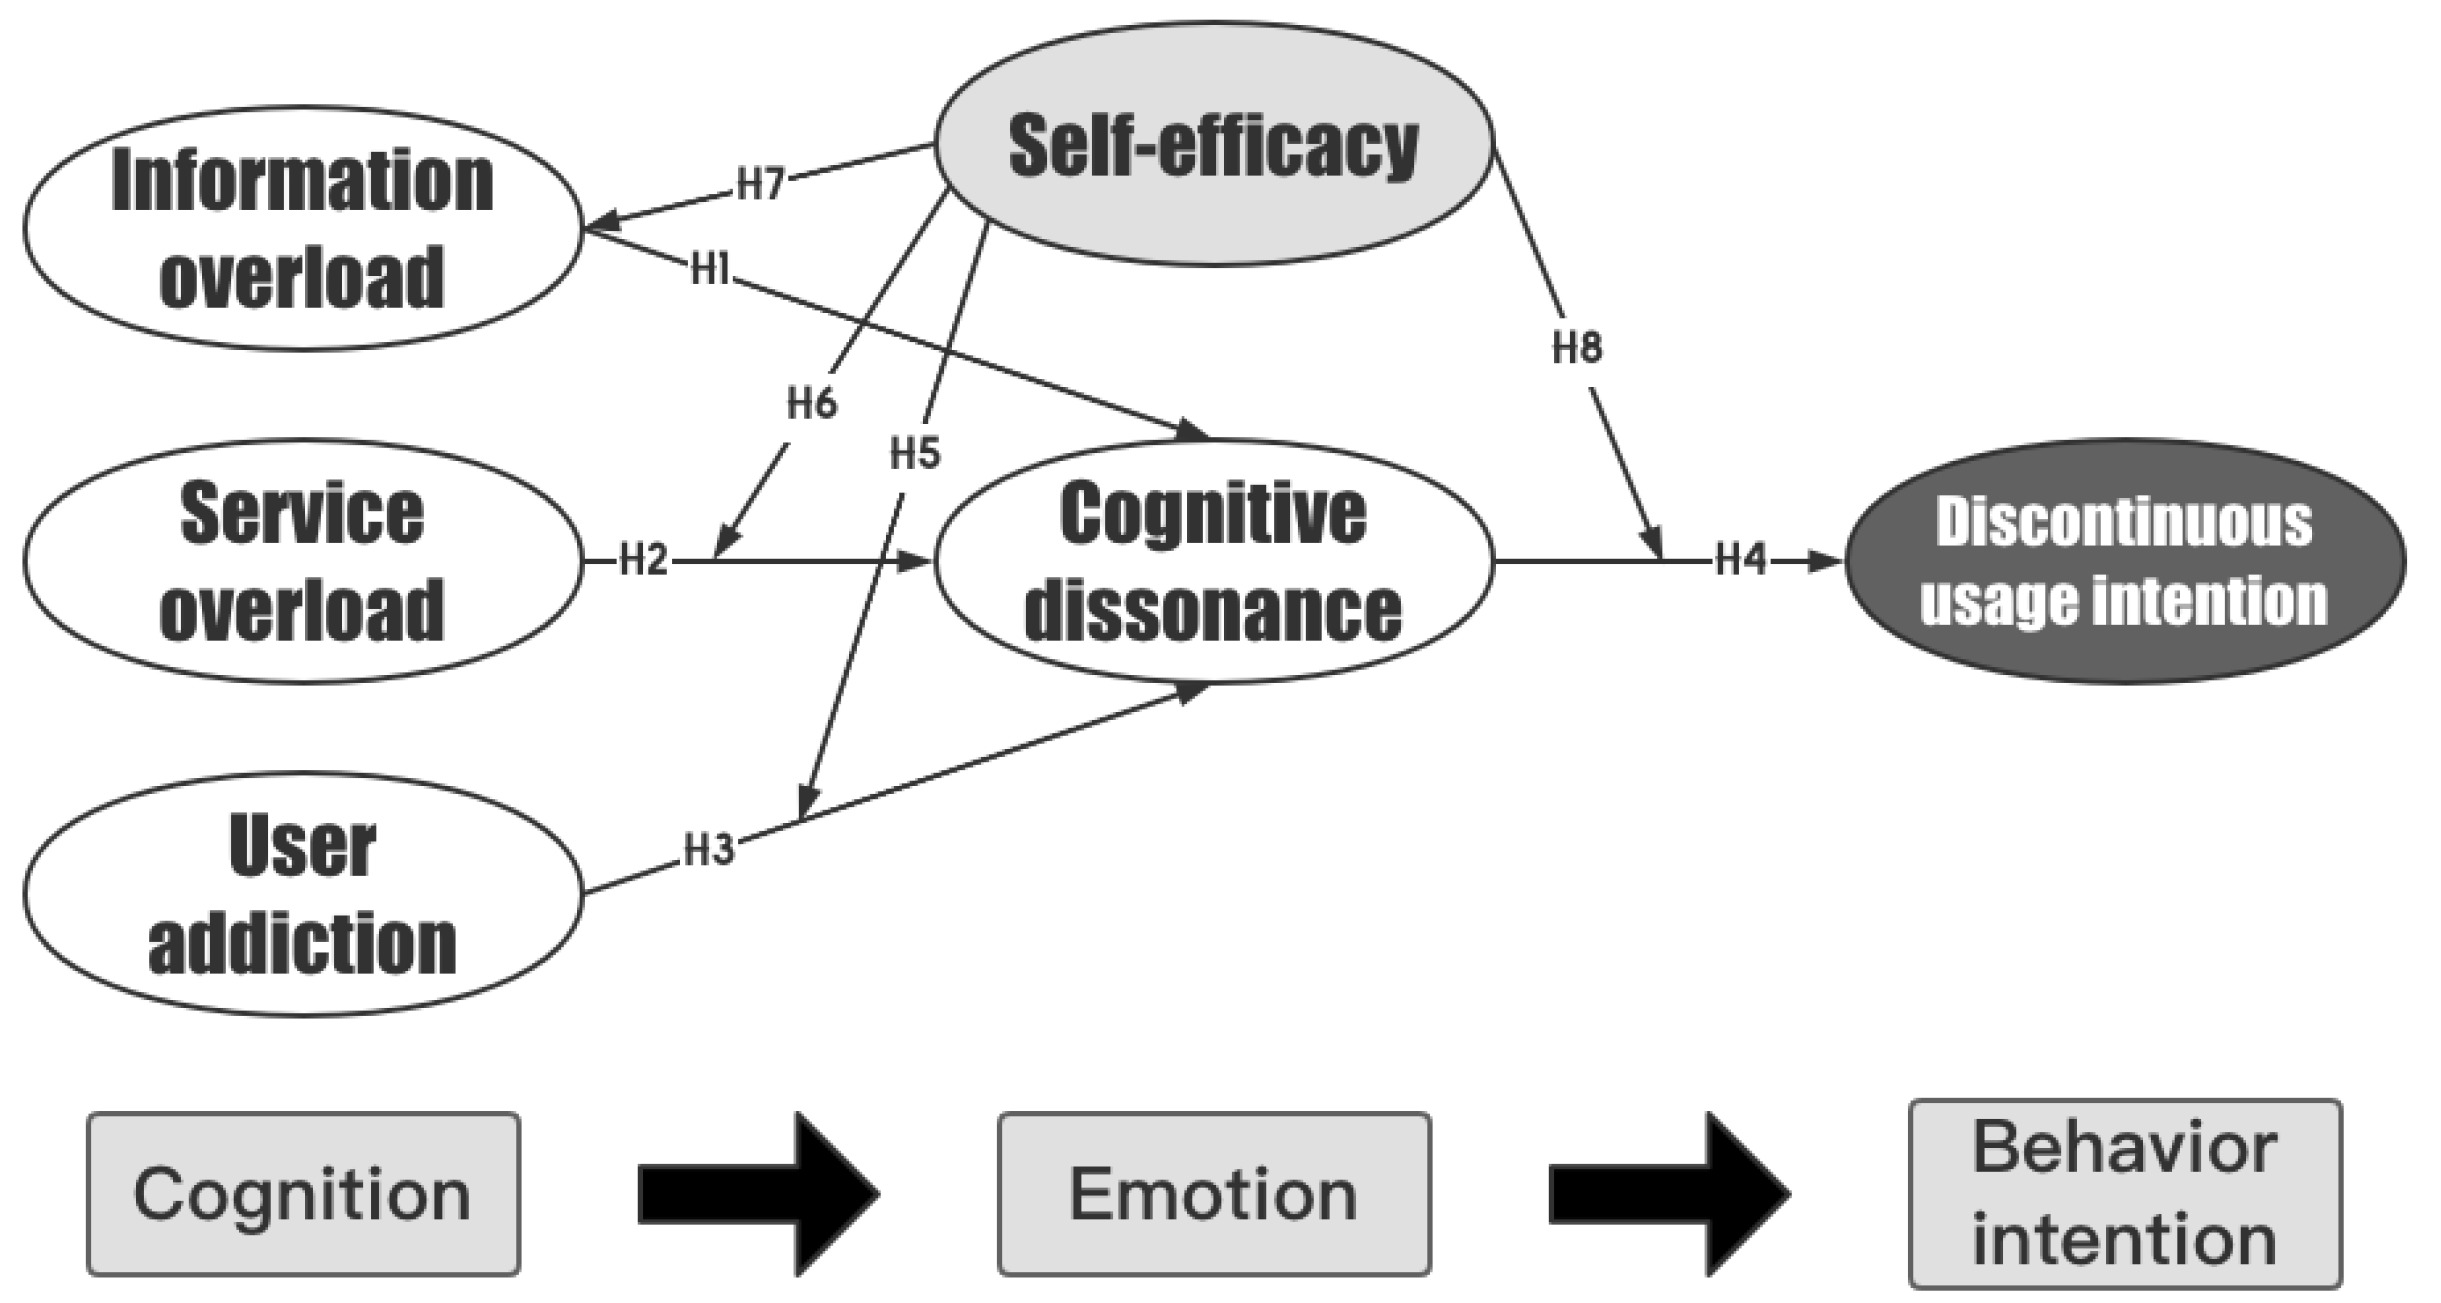 Behavioral Sciences Free Full-Text Mind over Matter Examining the Role of Cognitive Dissonance and Self-Efficacy in Discontinuous Usage Intentions on Pan-Entertainment Mobile Live Broadcast Platforms picture